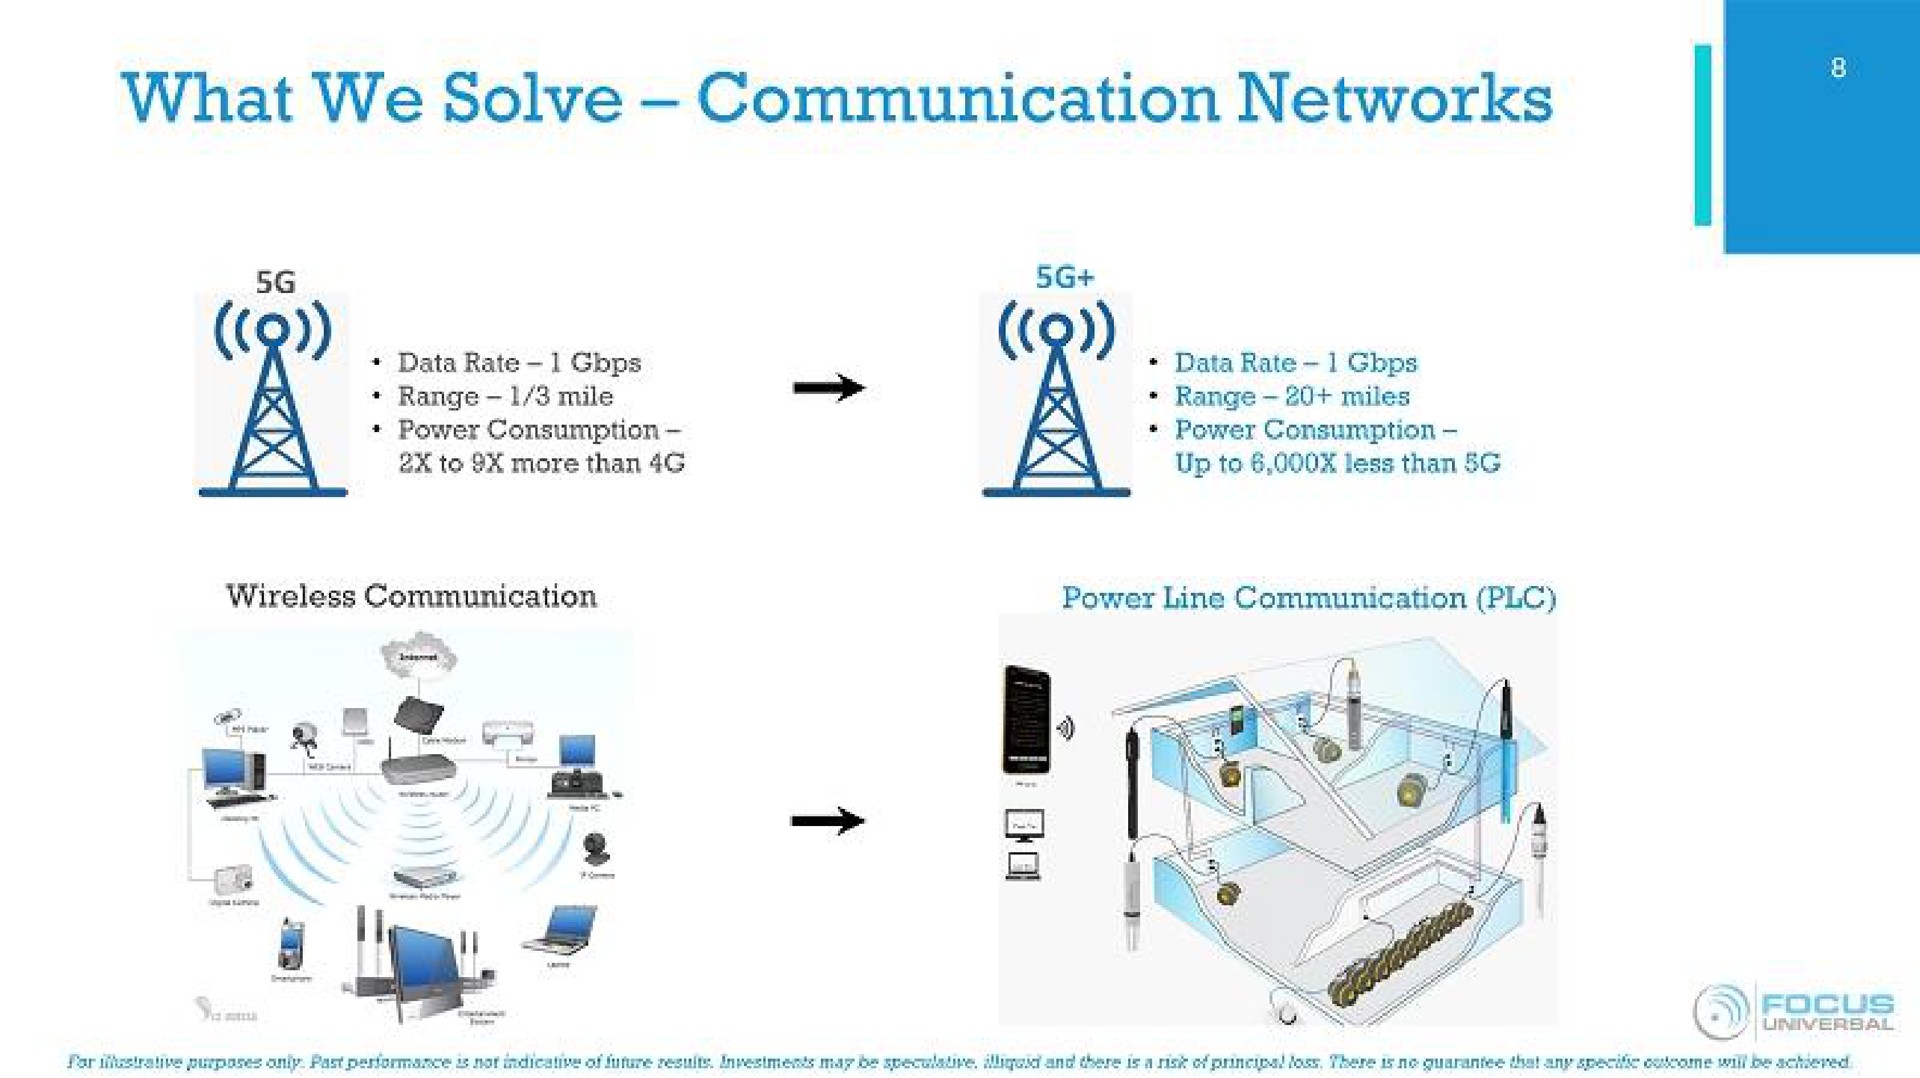 what we solve communication networks | Focus Universal